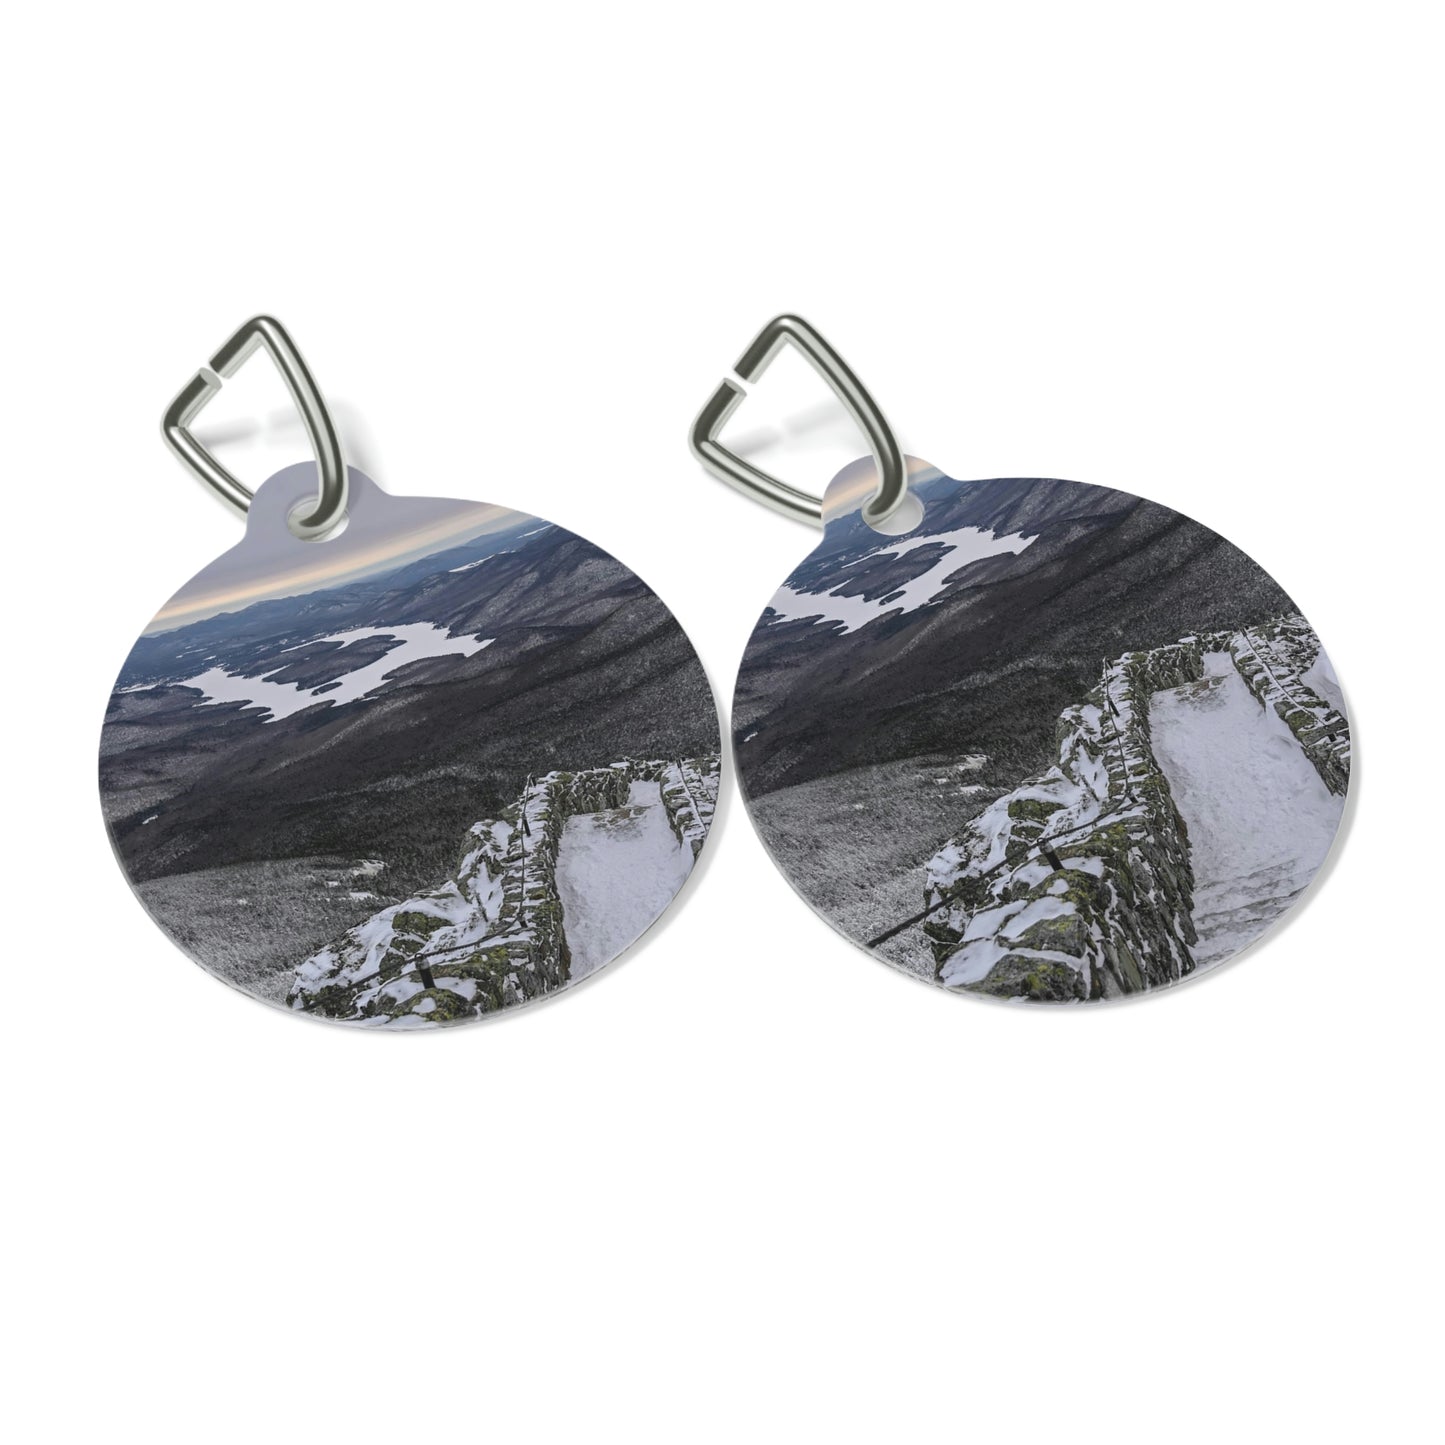 Pet Tag - Lake Placid View, Whiteface